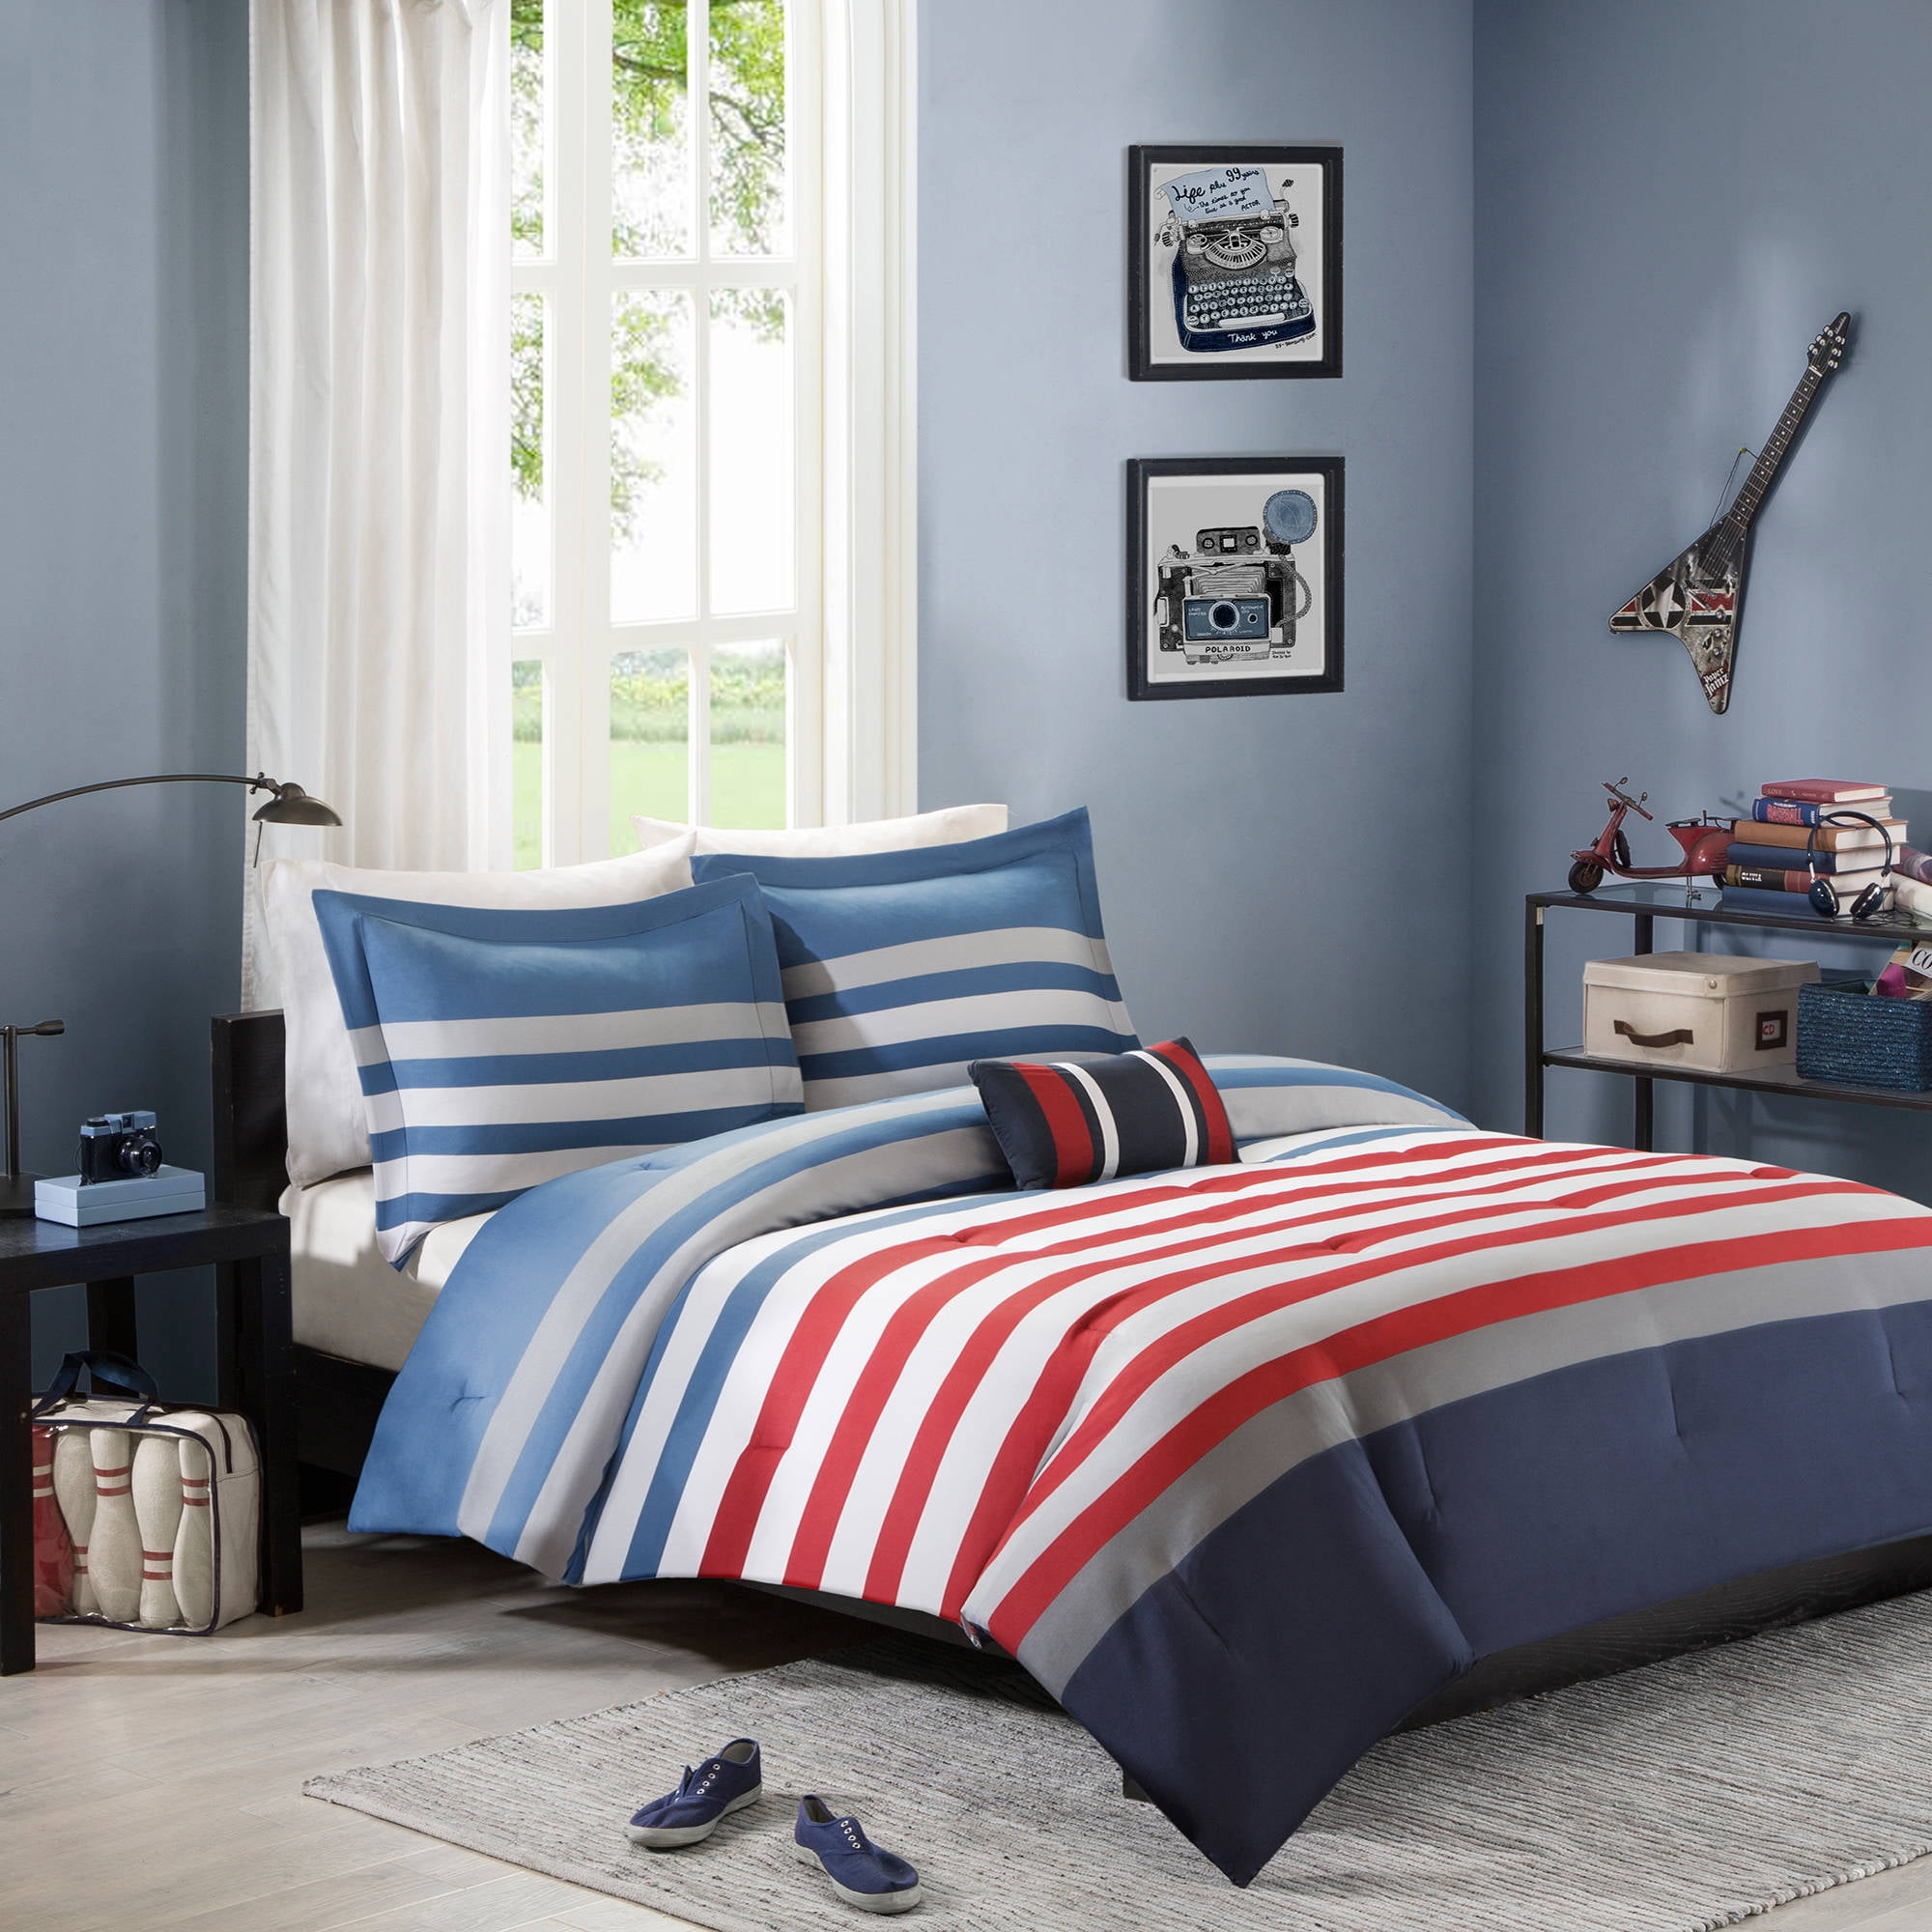 TWIN COZY NAVY BLUE WHITE GREY RED PLAID STRIPE BOYS COMFORTER QUILT SET FULL 